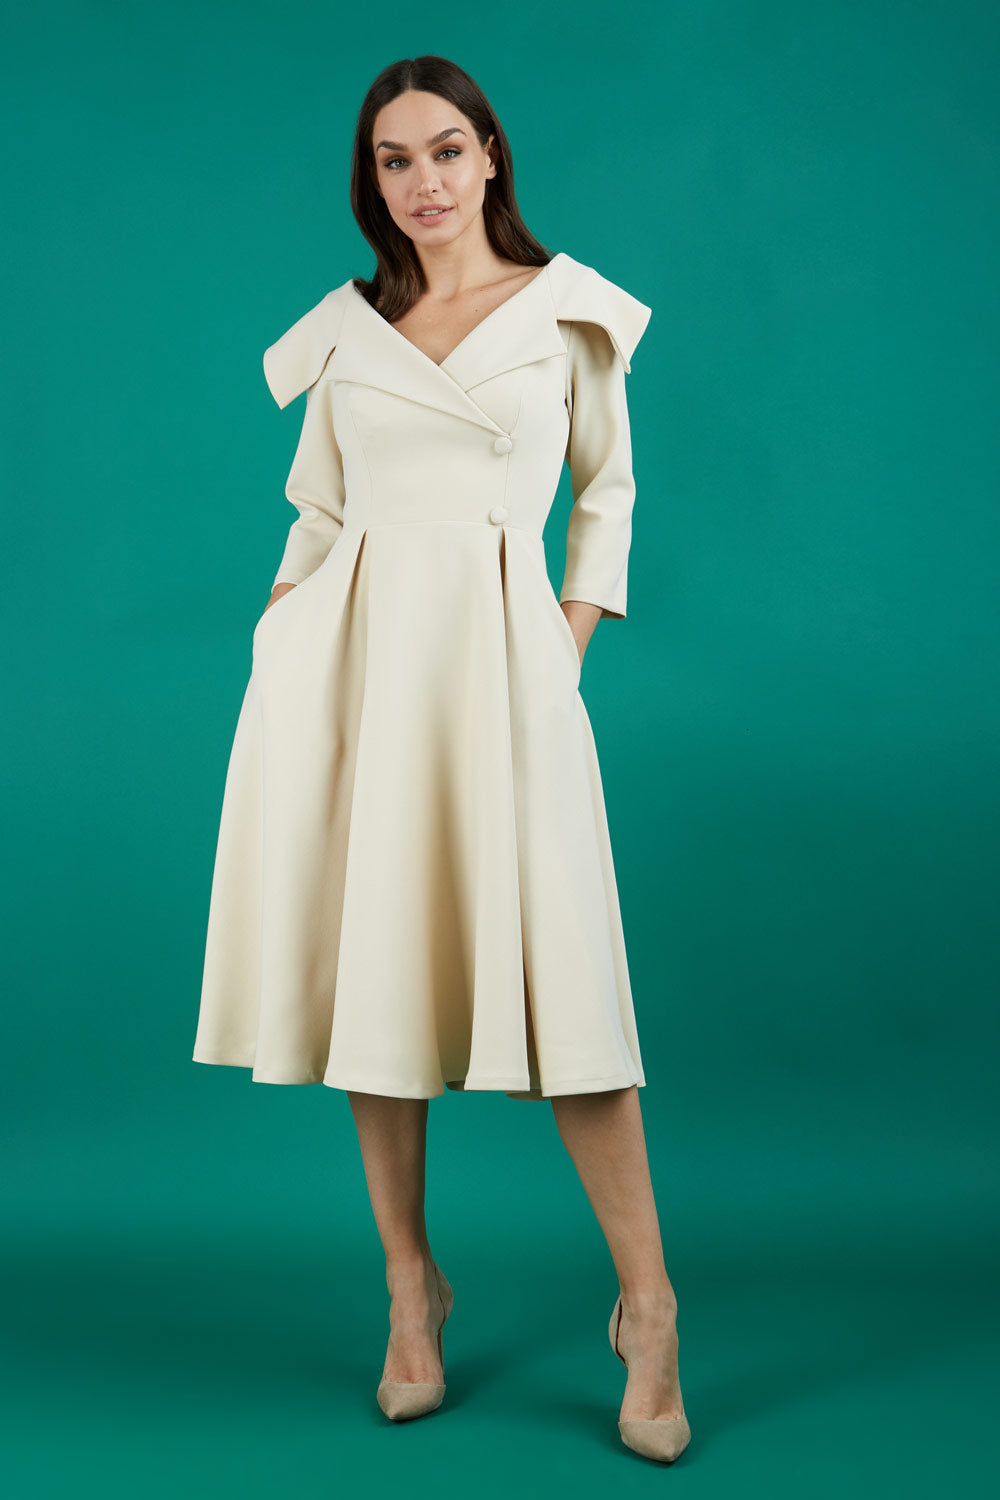 Brunette model is wearing a sleeved beige oversized collar swing dress with button detail at the front and pockets in the skirtmodel is wearing diva catwalk gatsby swing dress with pocket detail and wide v-neck collar and buttons down the front panel in sandshell beige front